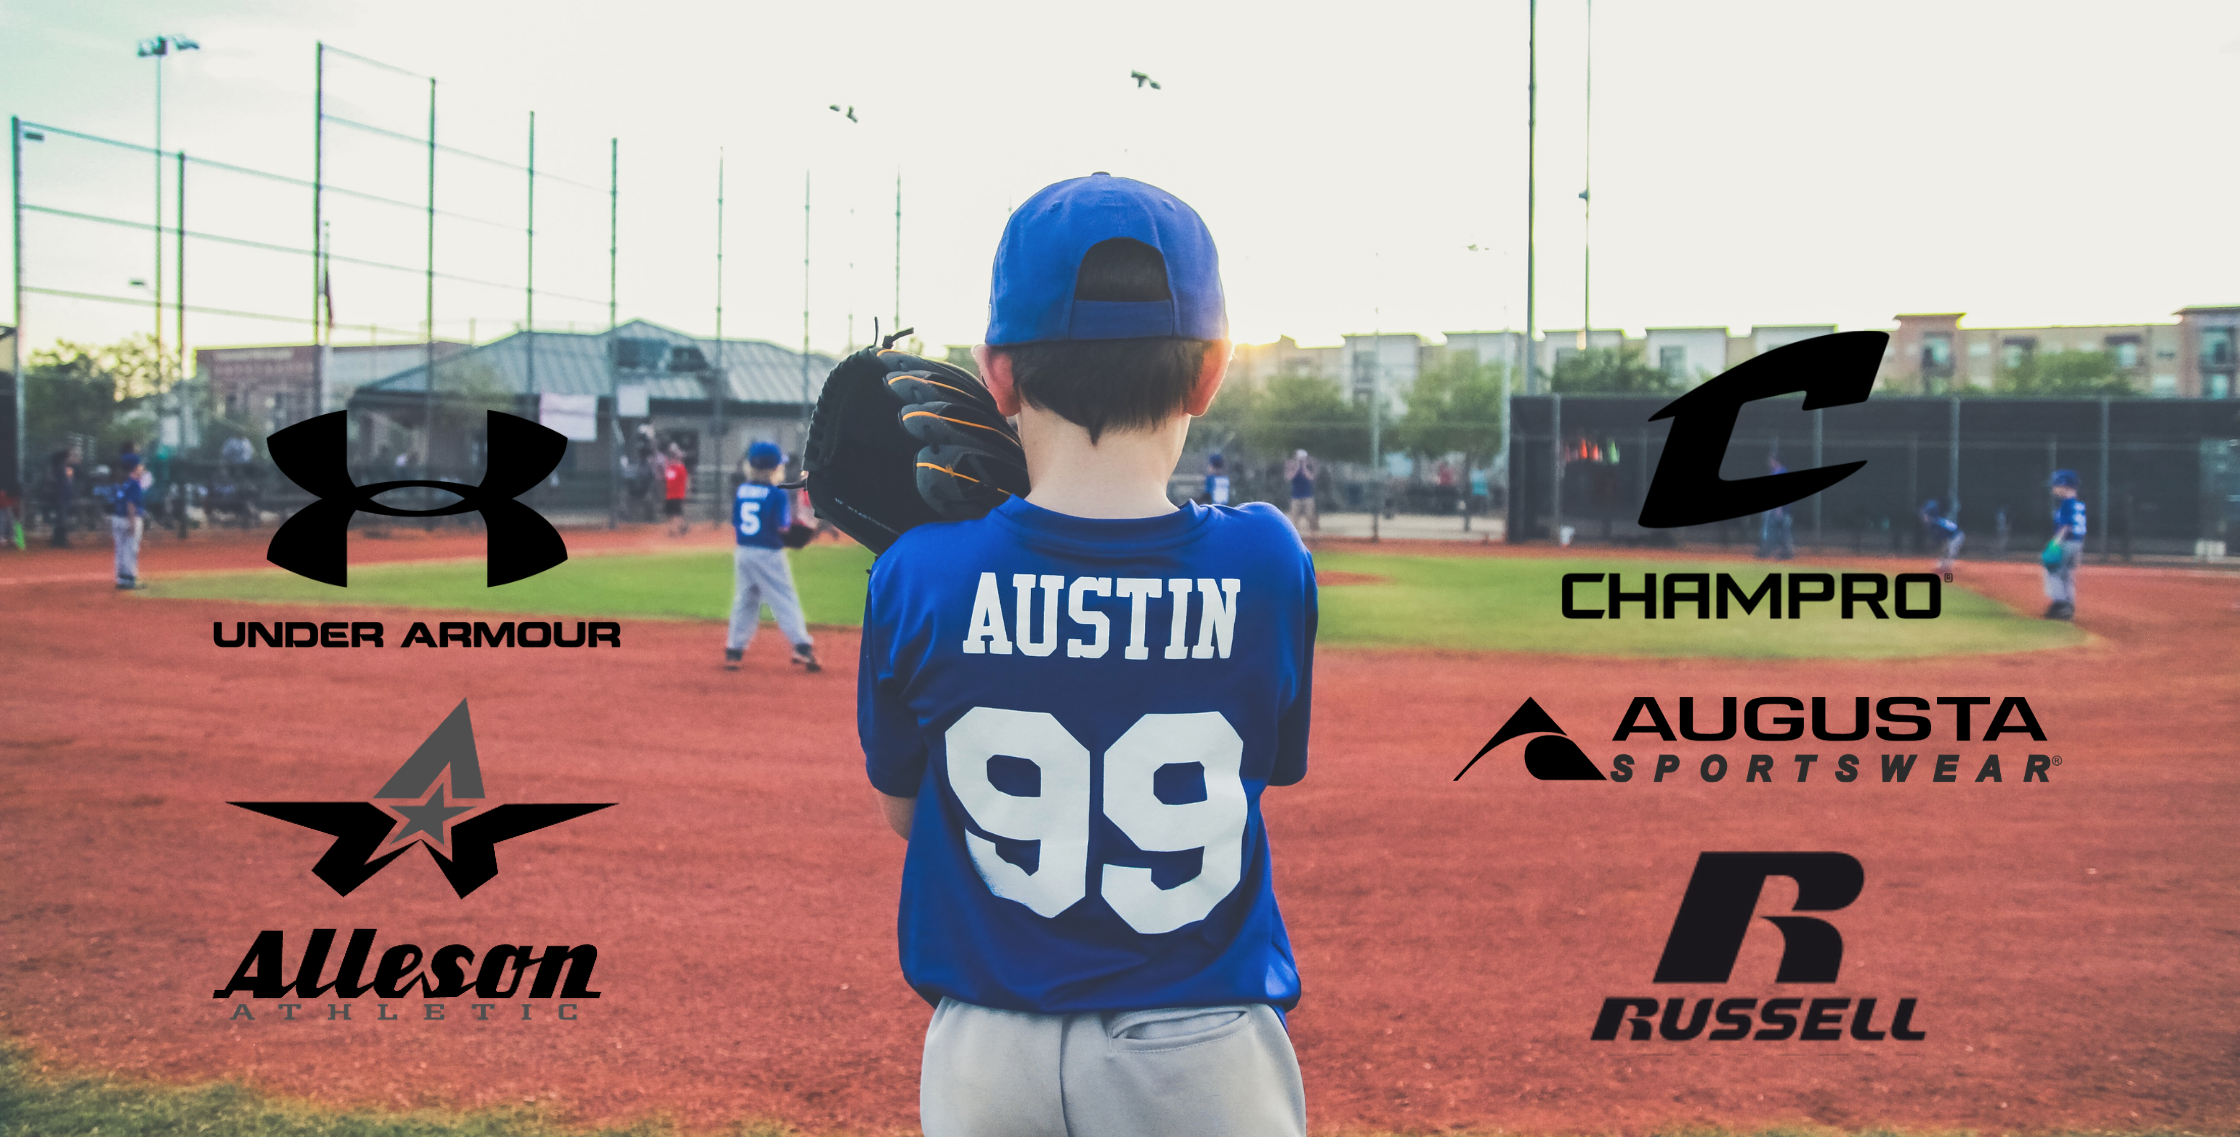 5 Best Selling Baseball Uniform Brands to Outfit Your Youth Team